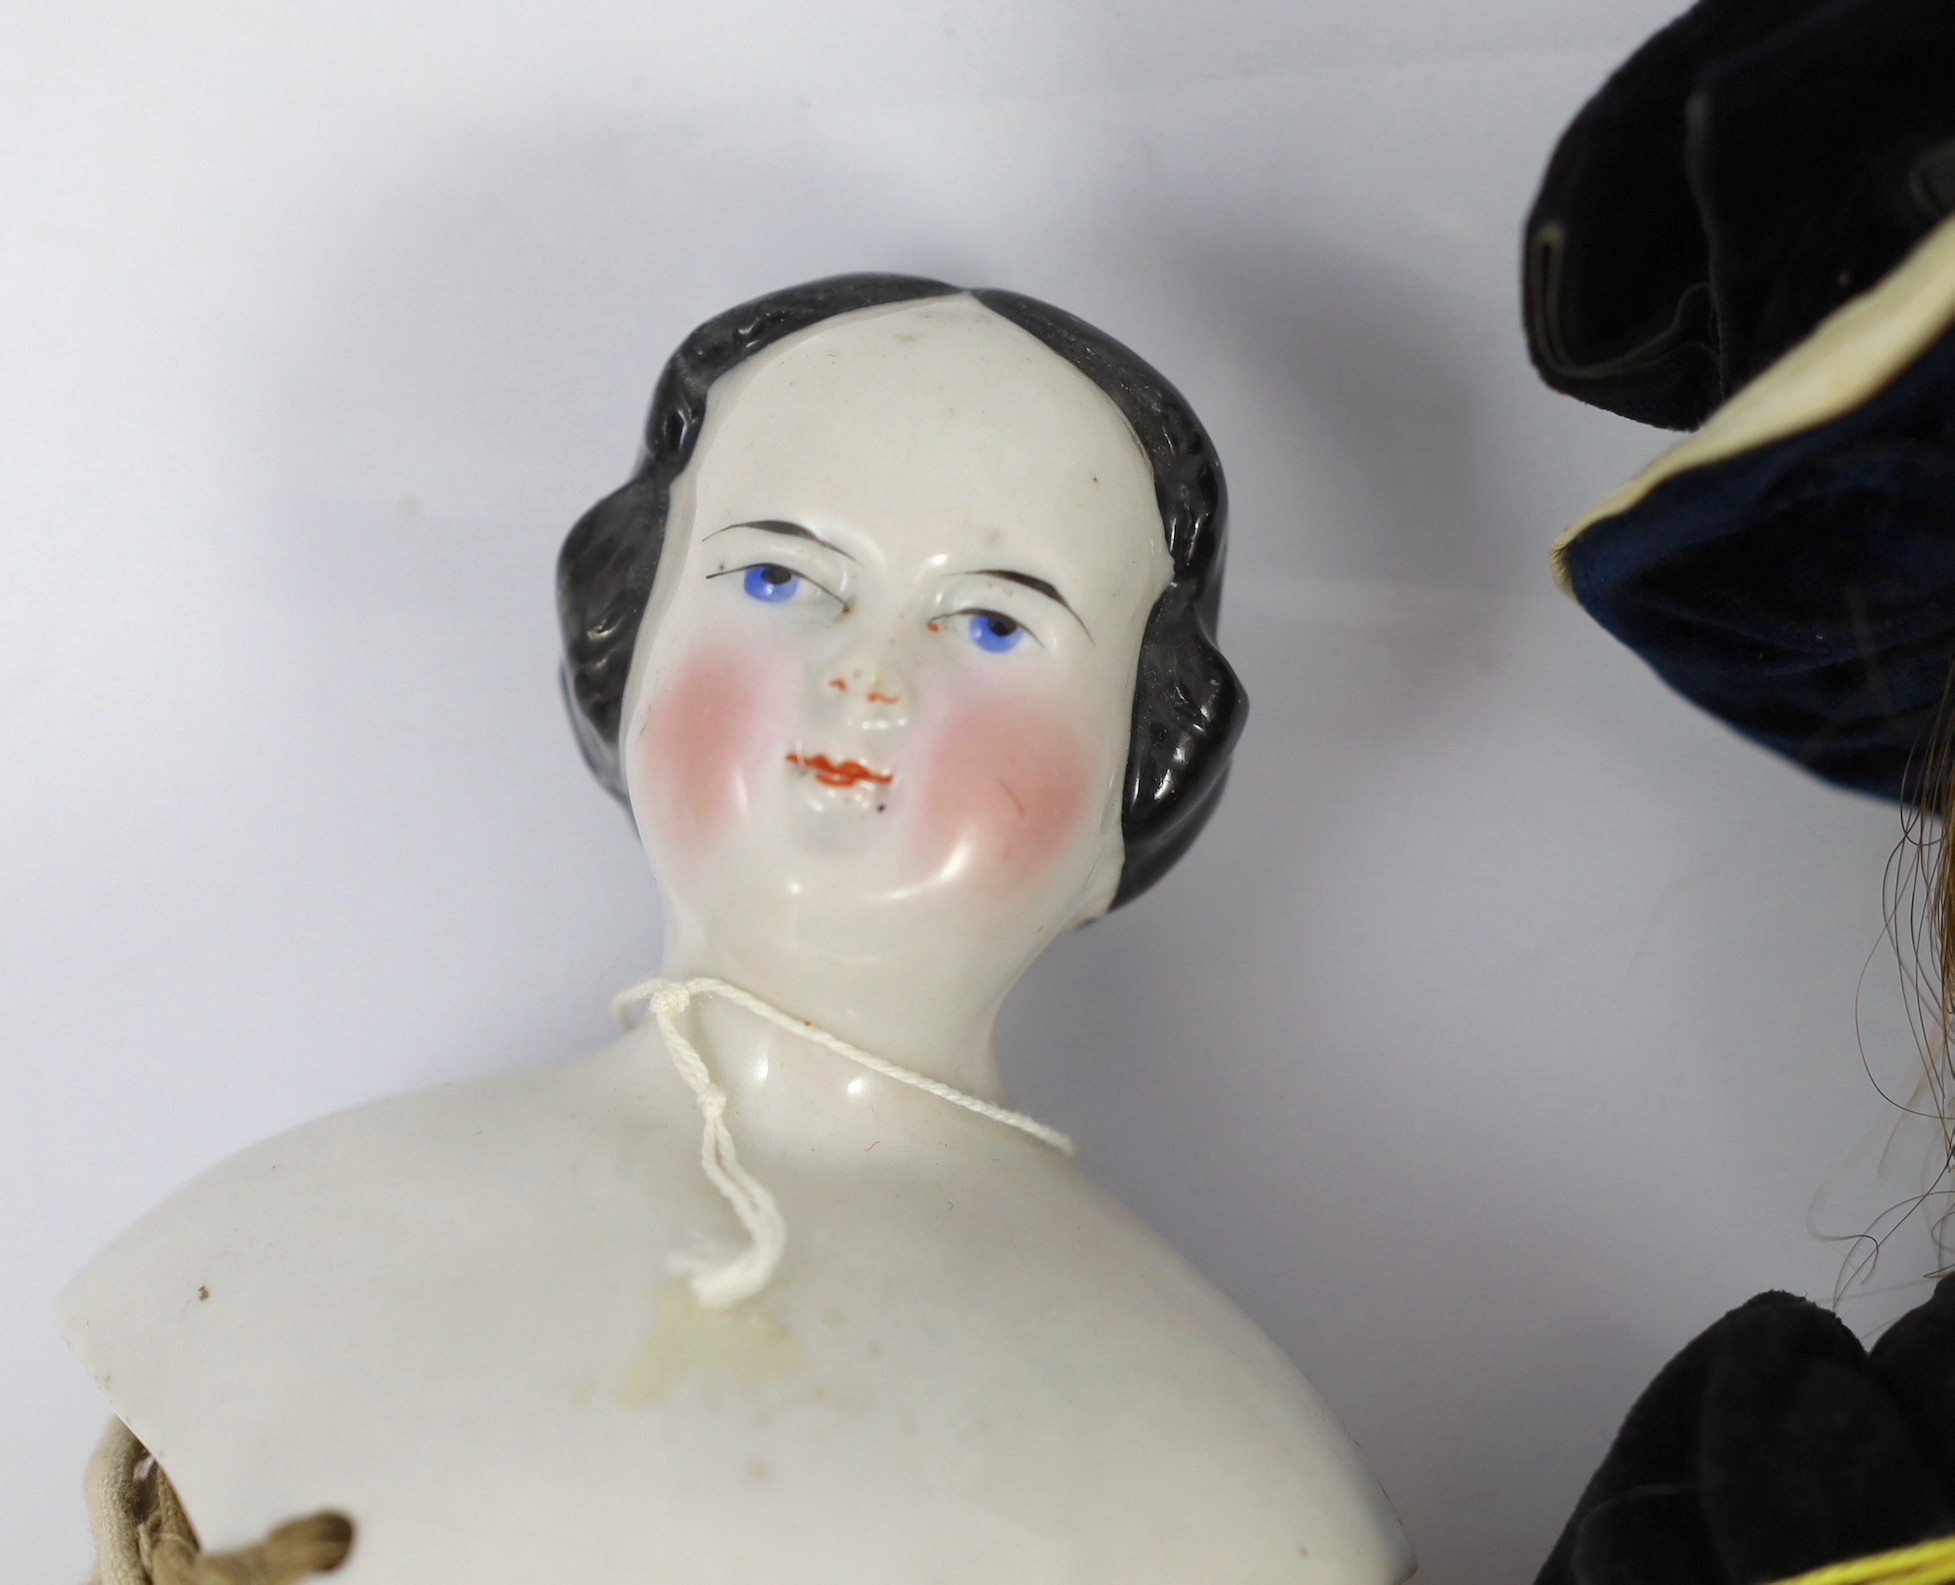 A Max Oscar Arnold Welsch bisque doll, German, circa 1920, impressed 150 0, with open mouth and - Image 2 of 4